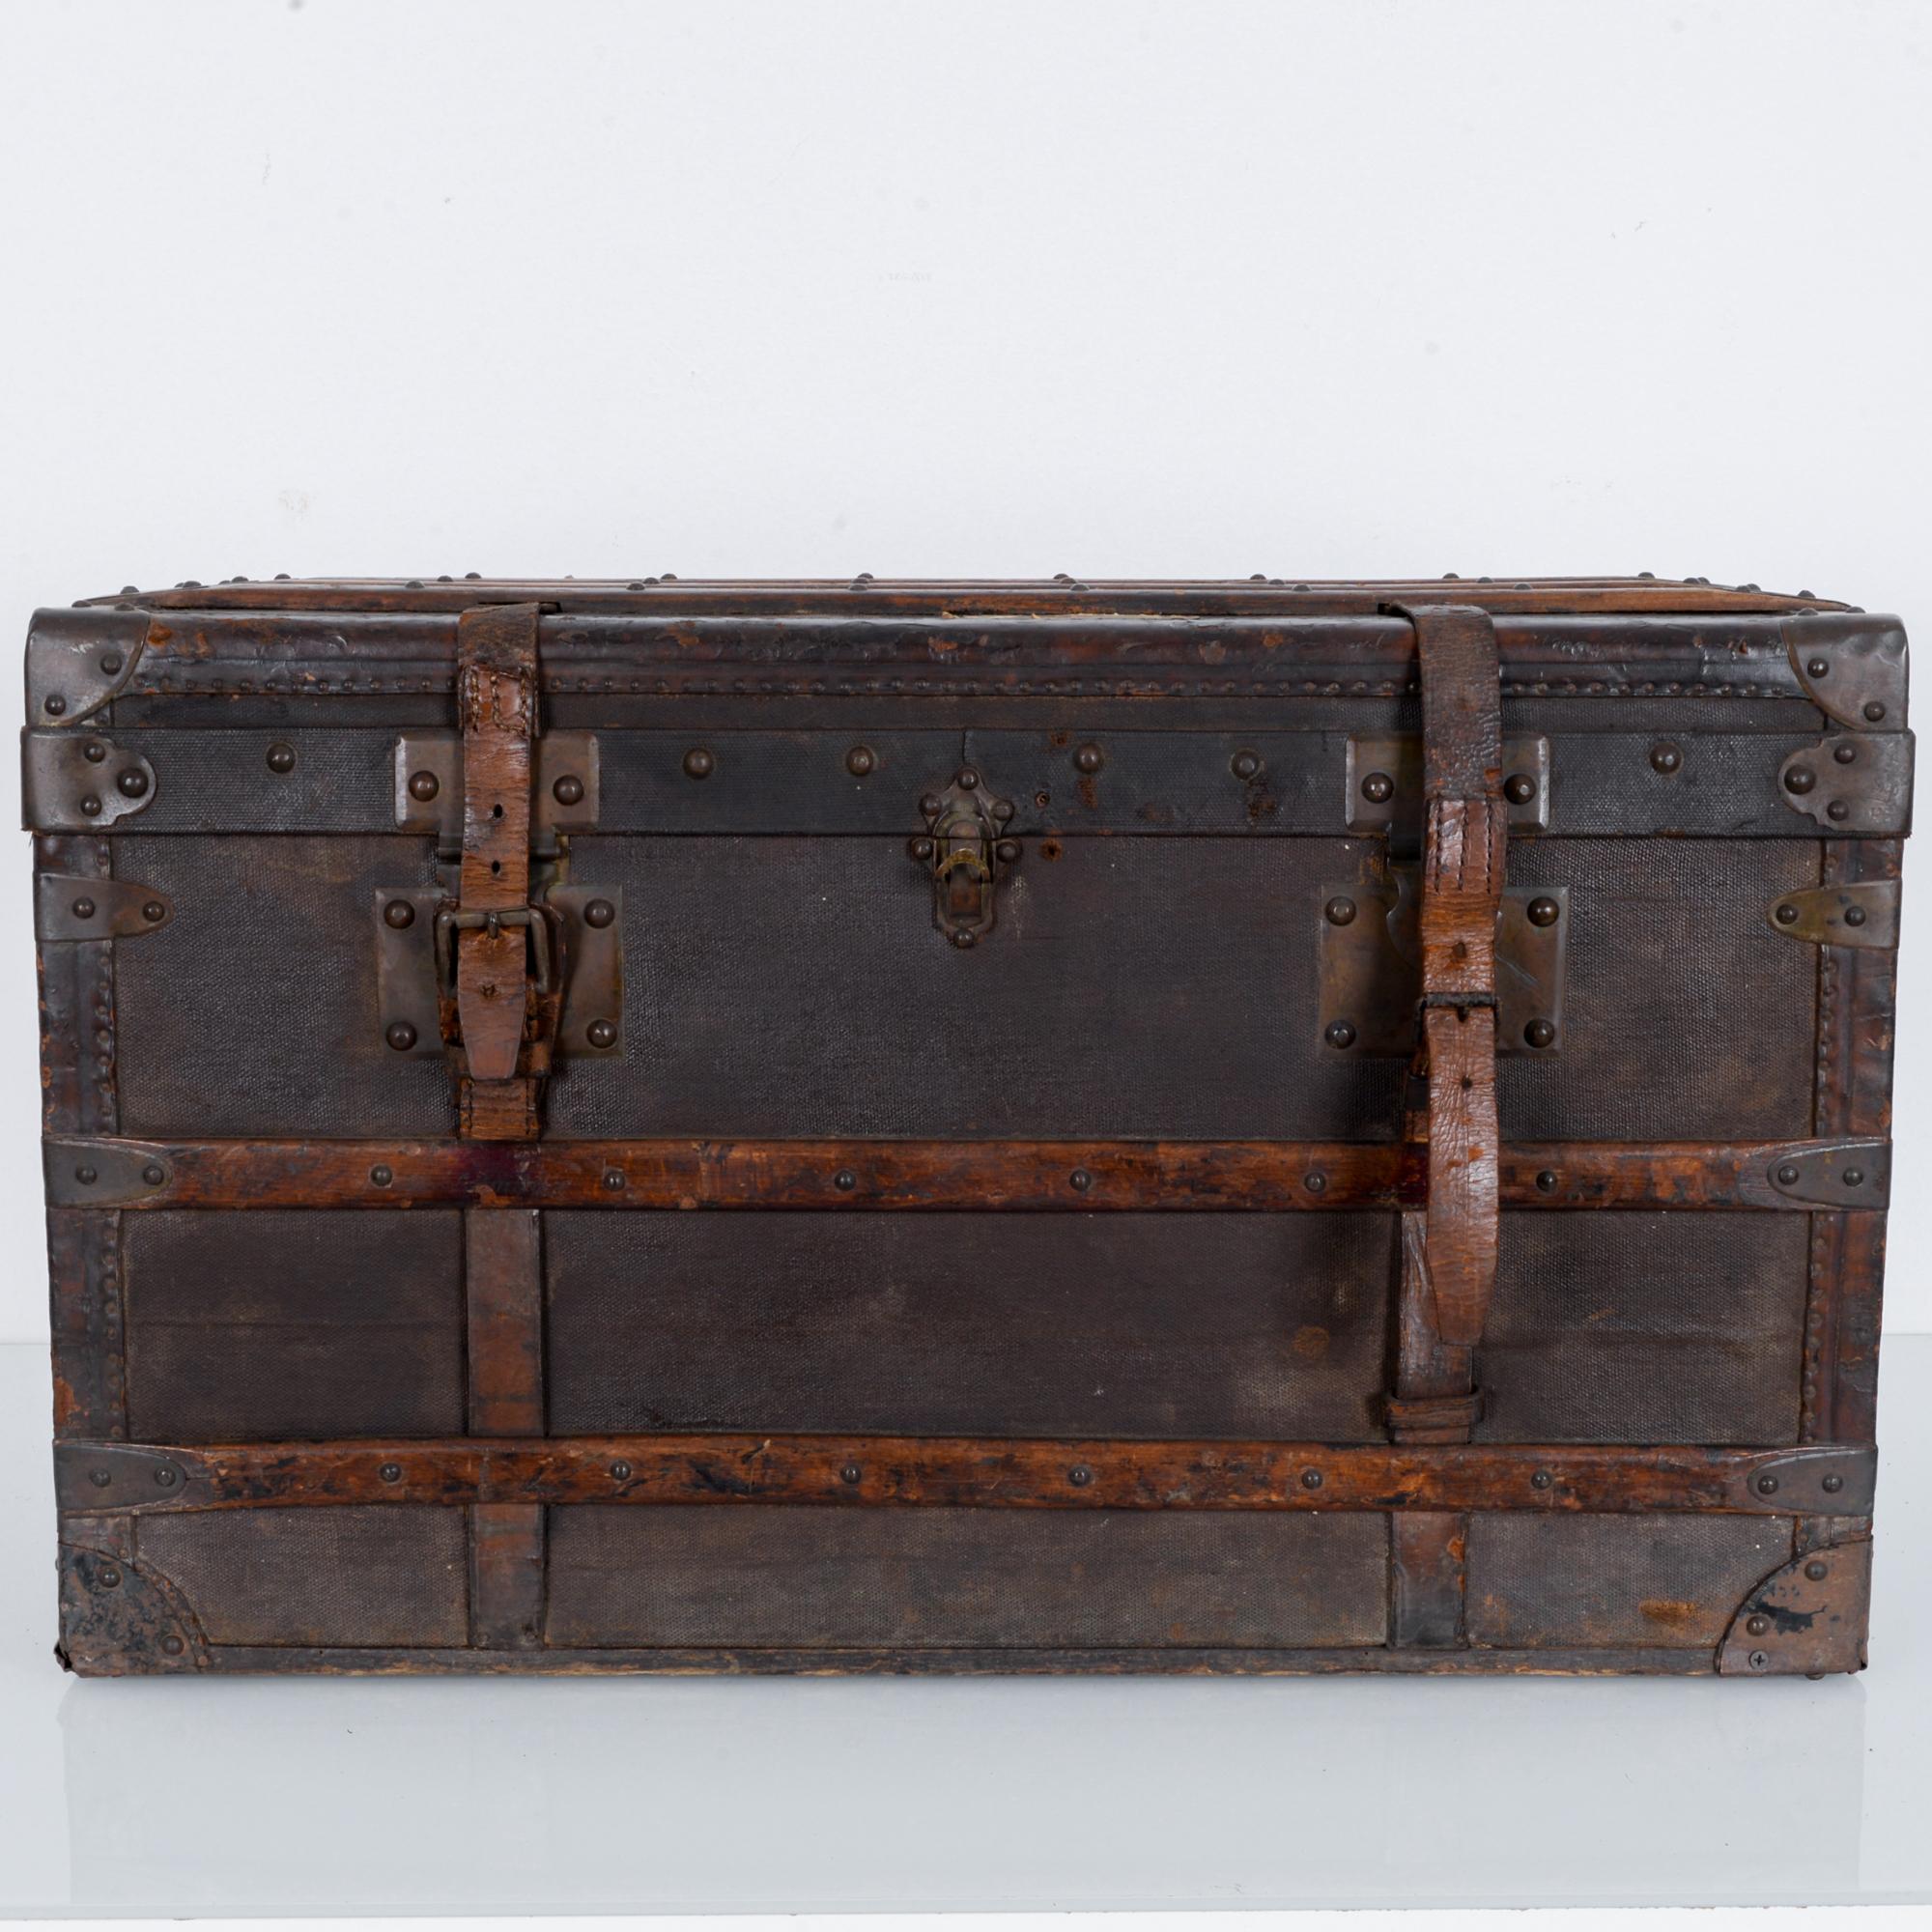 A beautifully aged French leather suitcase from the turn of the 20th century. Featuring a blue or white striped cloth interior, two leather straps, clasp, and interior red leather pocket this case works open or shut, standing alone or full of